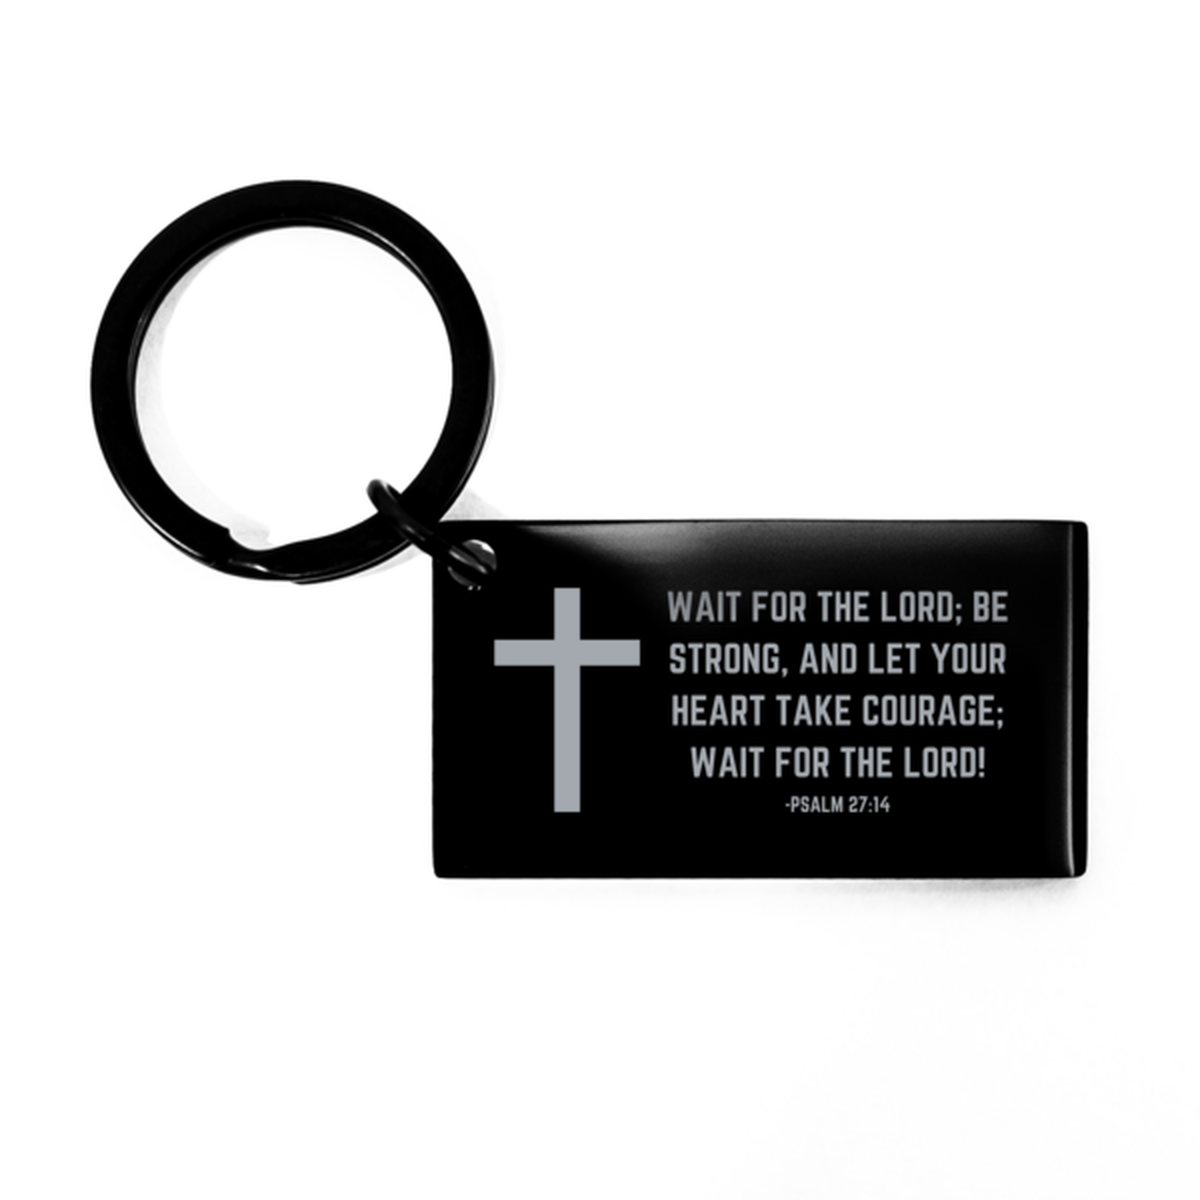 Baptism Gifts For Teenage Boys Girls, Christian Bible Verse Black Keychain, Wait for the Lord, Confirmation Gifts, Bible Verse Keyring for Son, Godson, Grandson, Nephew